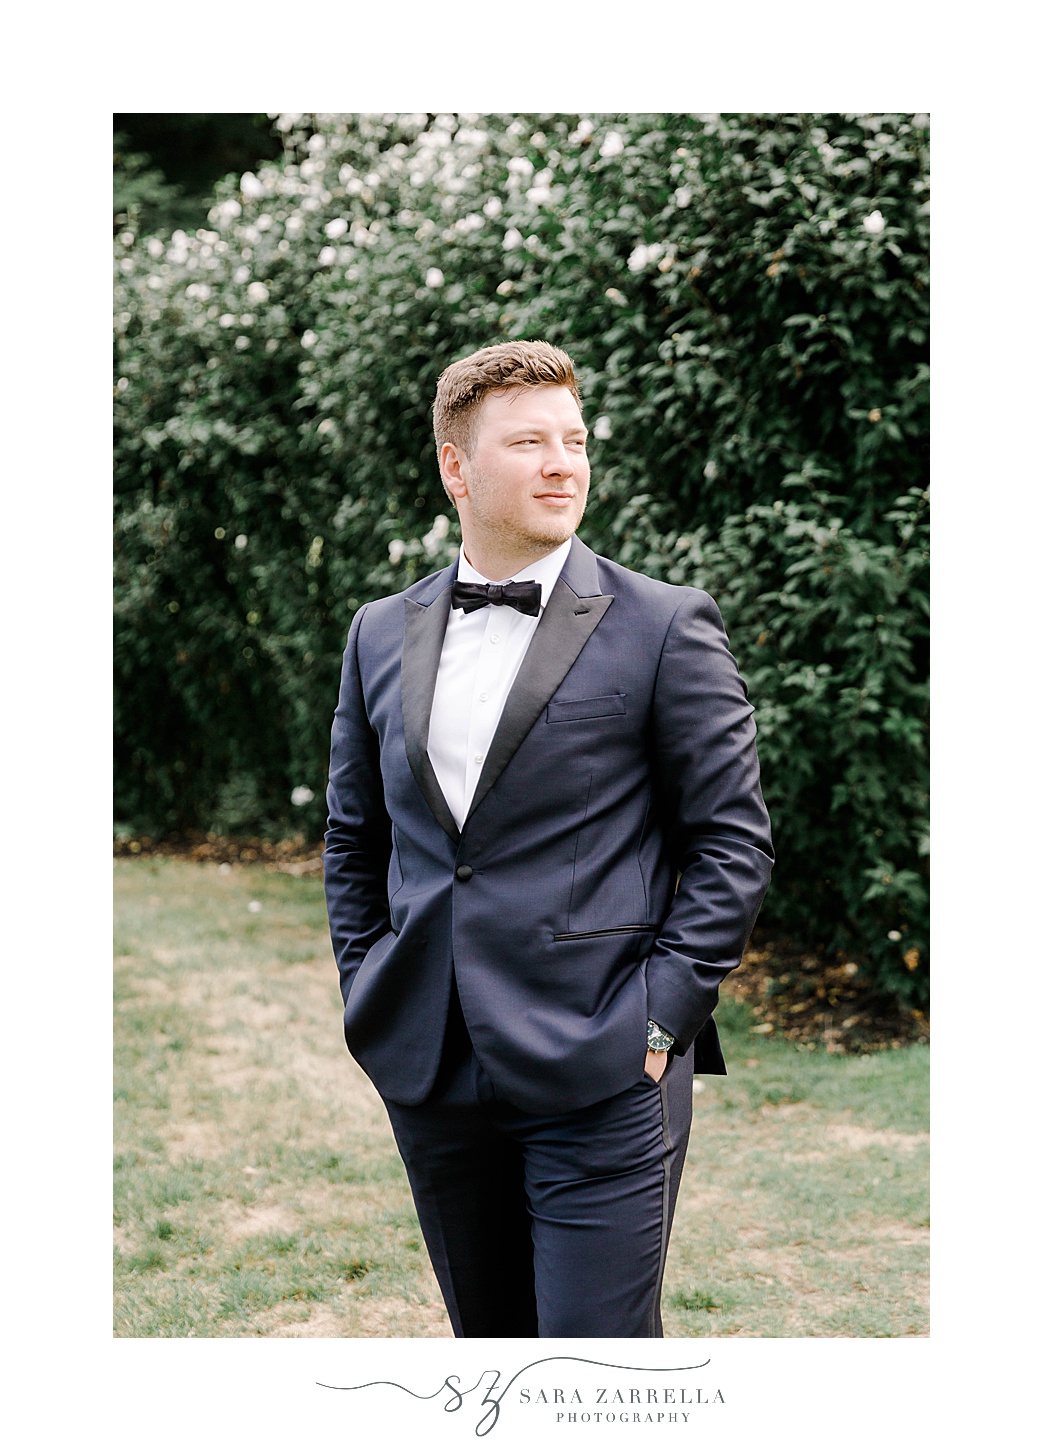 groom stands with hands in pockets in navy suit